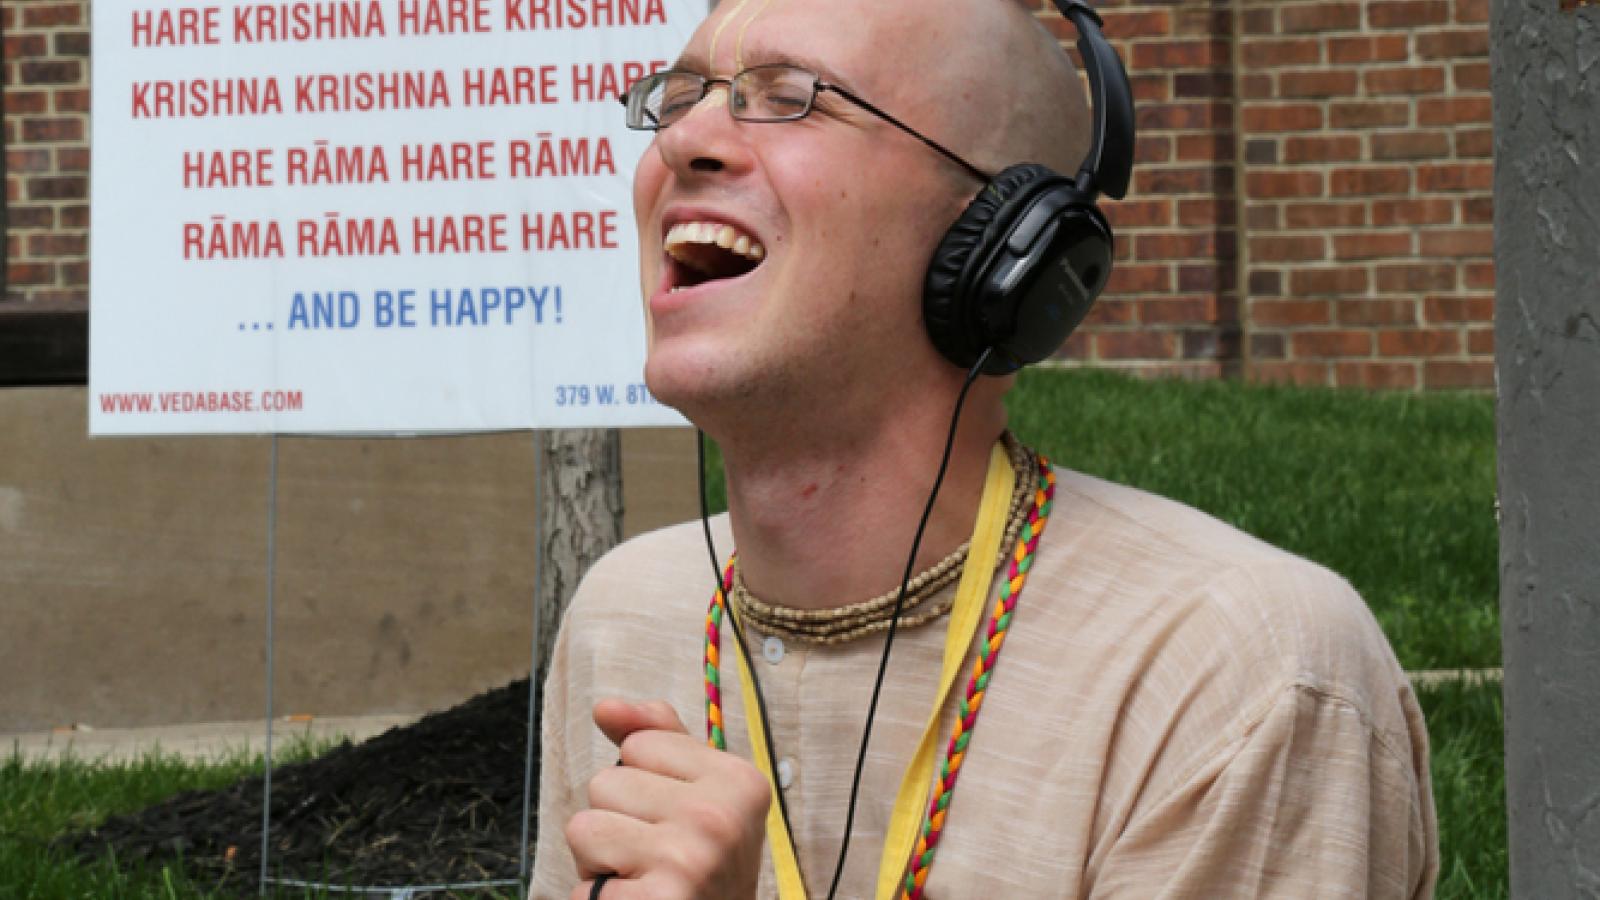 A man with a shaved head and glasses is holding a brass percussion instrument and his mouth is open like he is singing